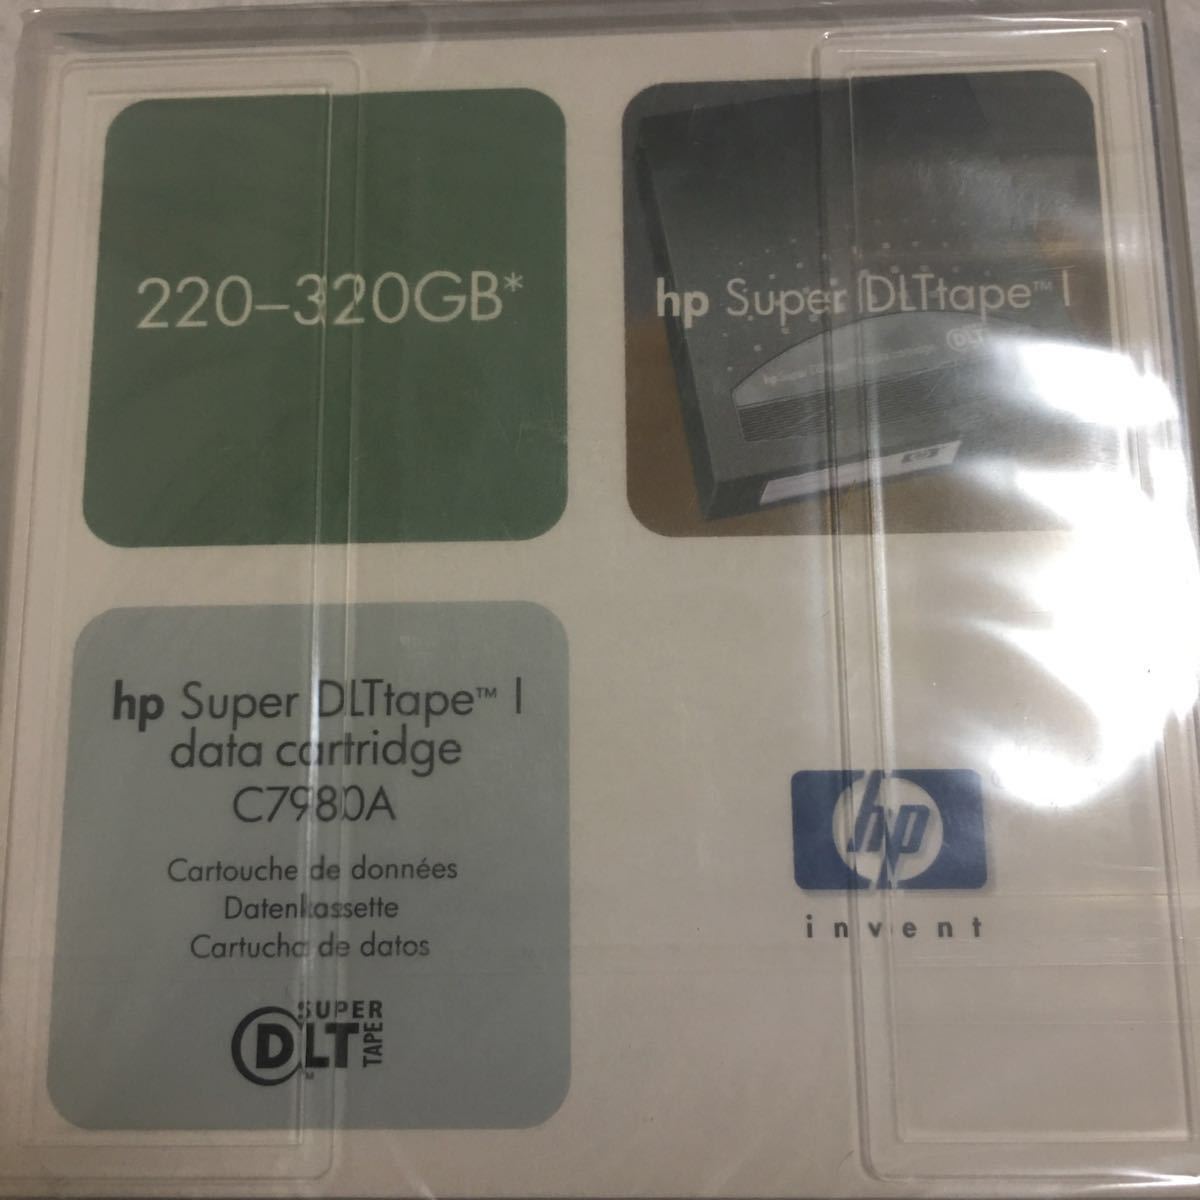 HP made C7980A SDLT 220-320GB data cartridge new goods .C7982A SDLT cleaning cartridge beautiful goods 2 piece set cheap exhibition free shipping 